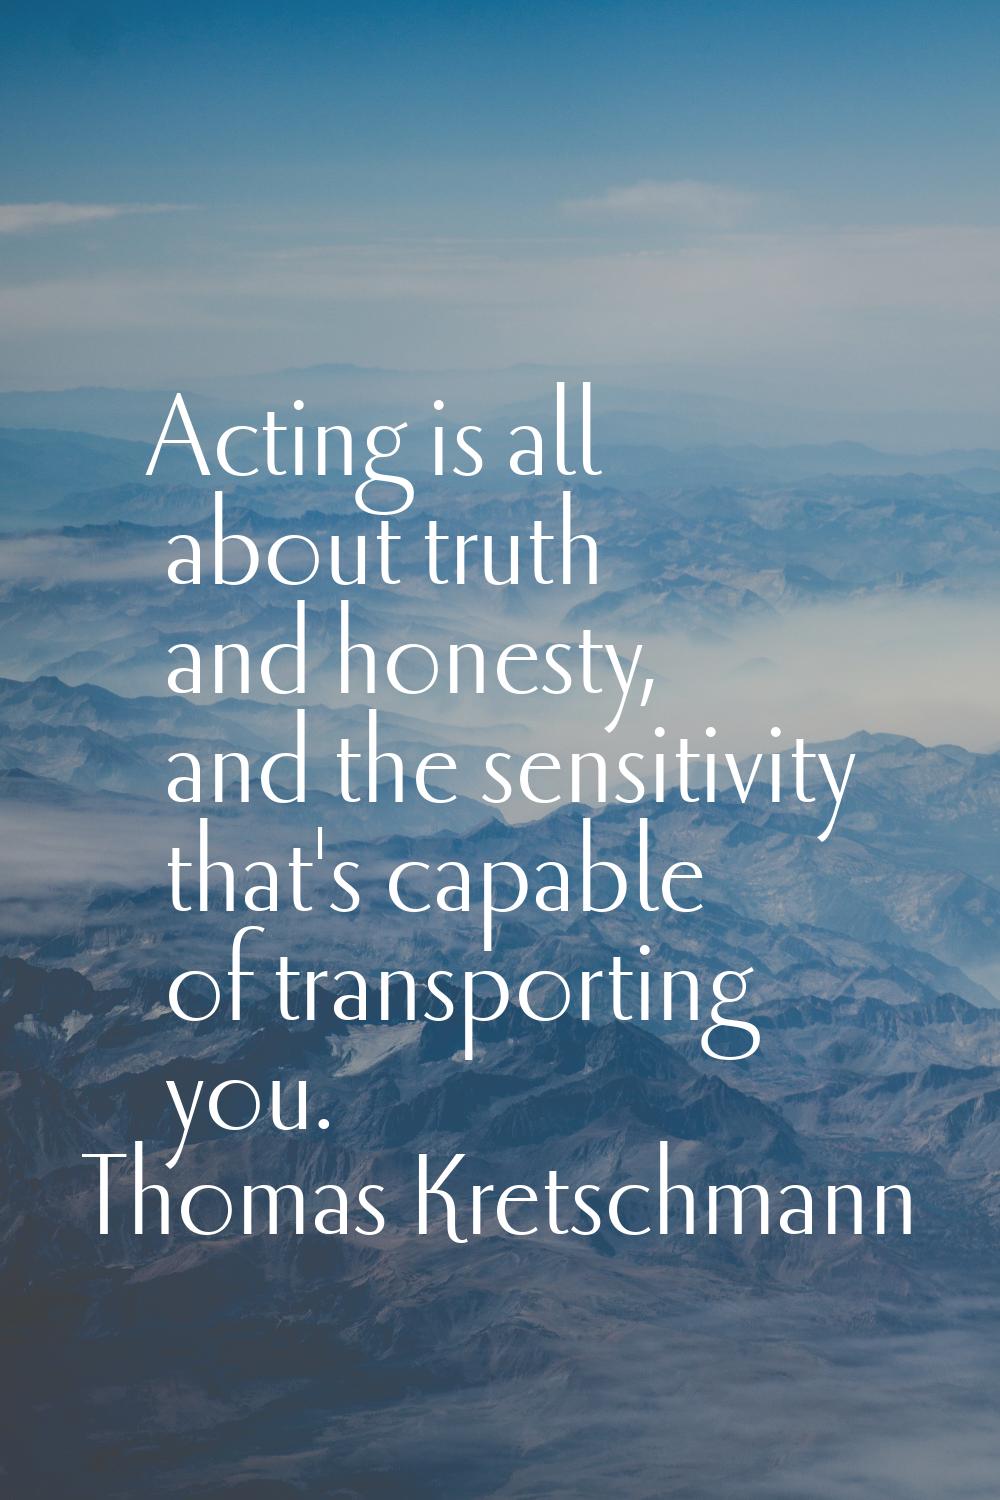 Acting is all about truth and honesty, and the sensitivity that's capable of transporting you.